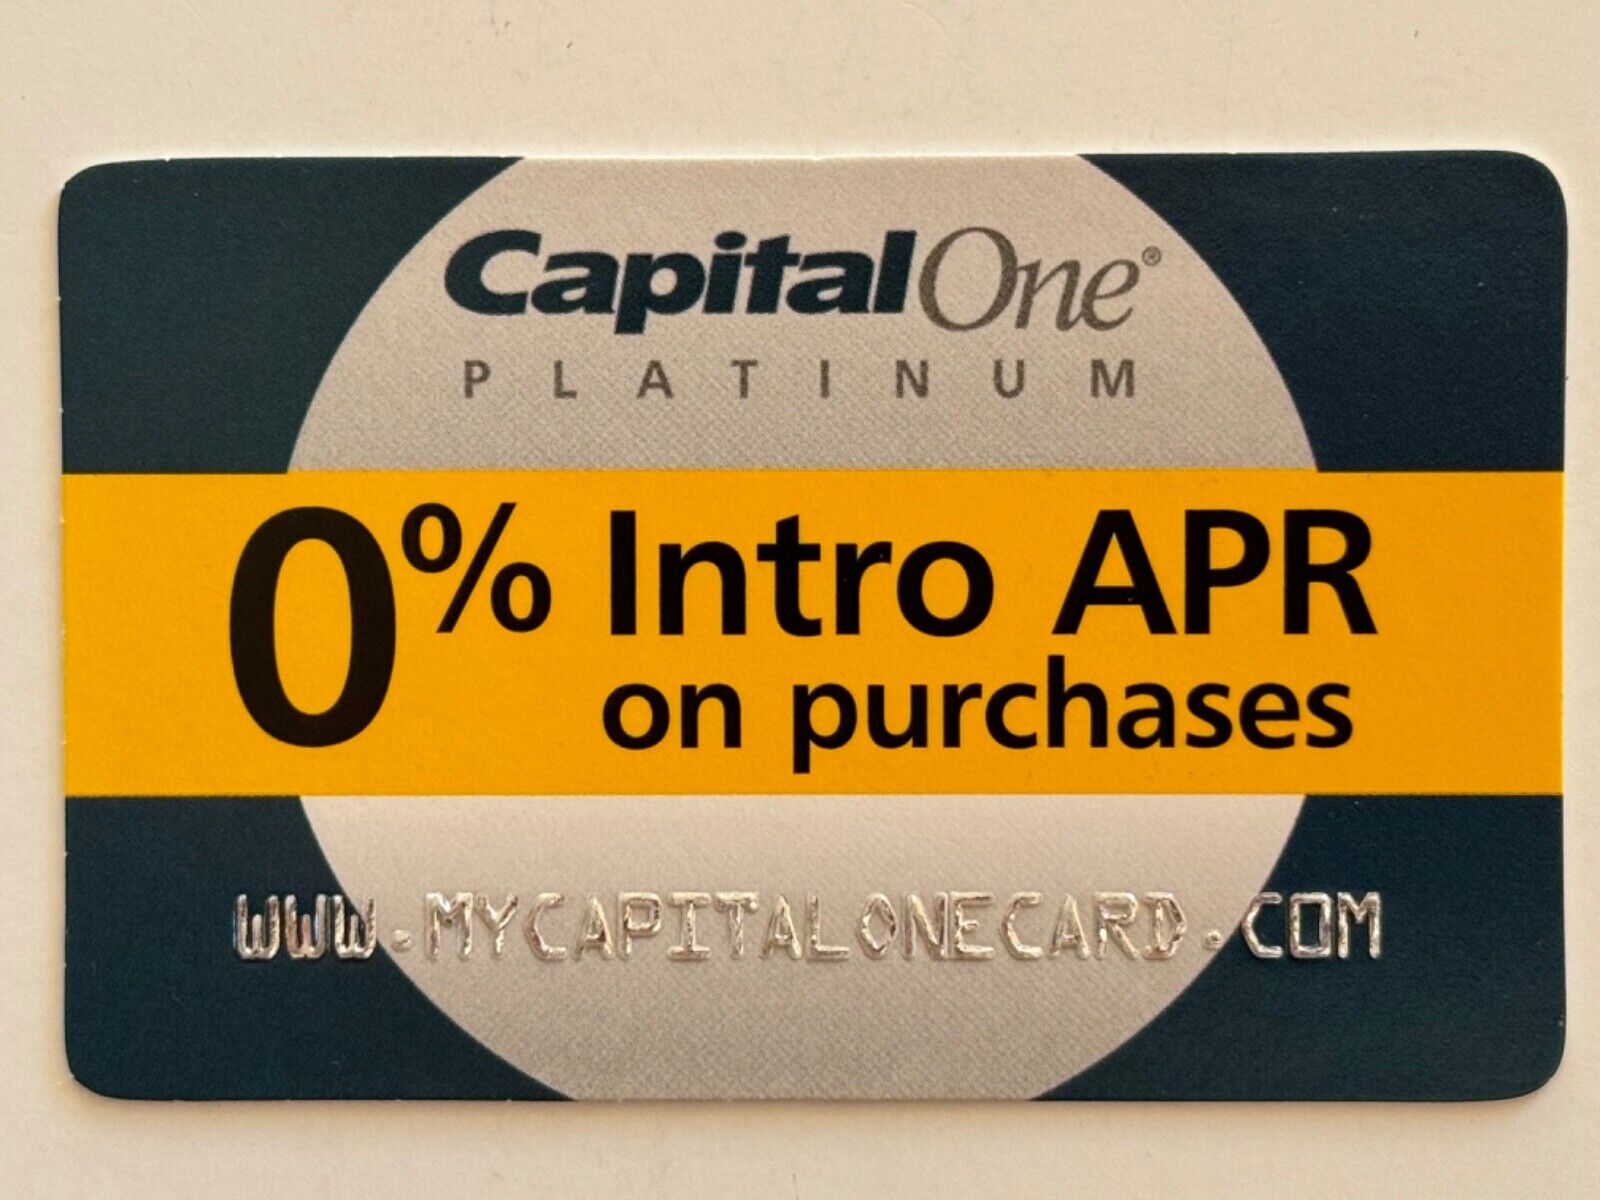 Capital One FAKE Credit Card▪️Collectible Only▪️Not a Valid Credit Card